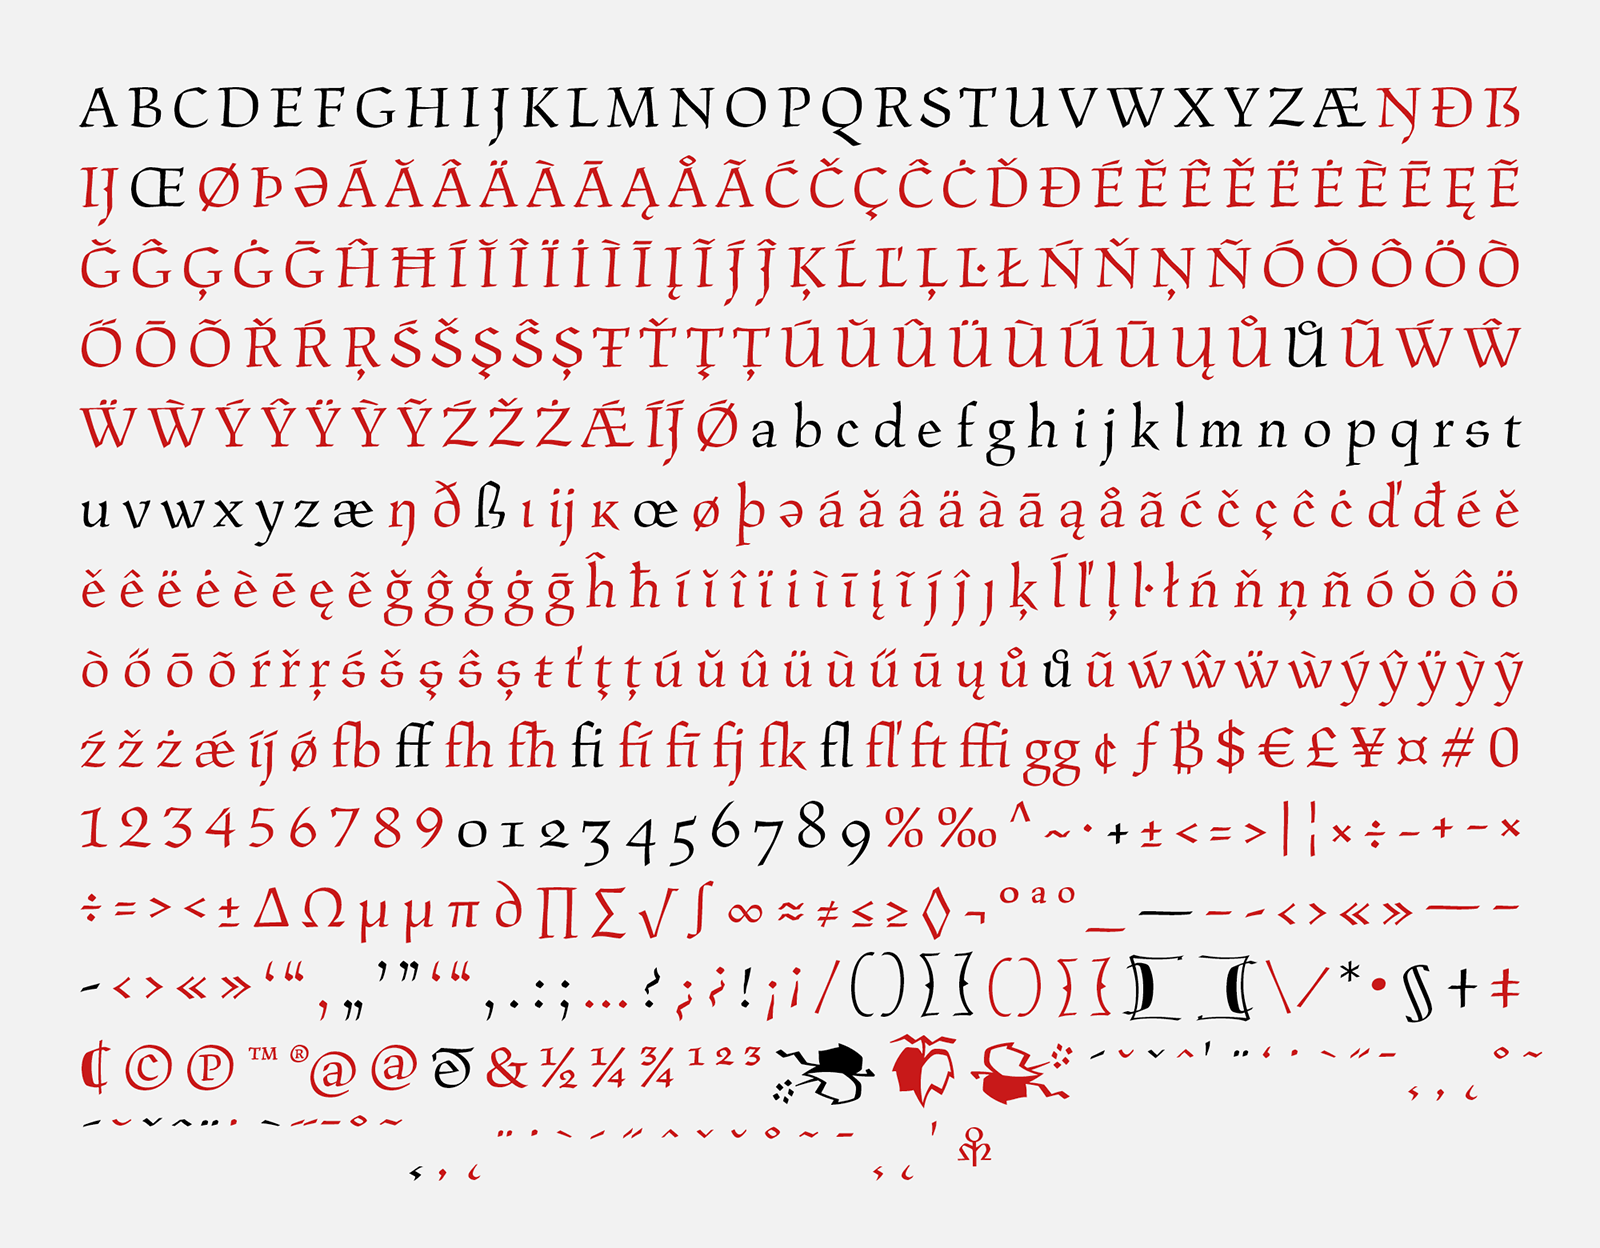 The BC Parlament typeface’s complete character set. The ones marked in black are the original characters designed by Oldřich Menhart. The red characters are the ones that have been newly created.